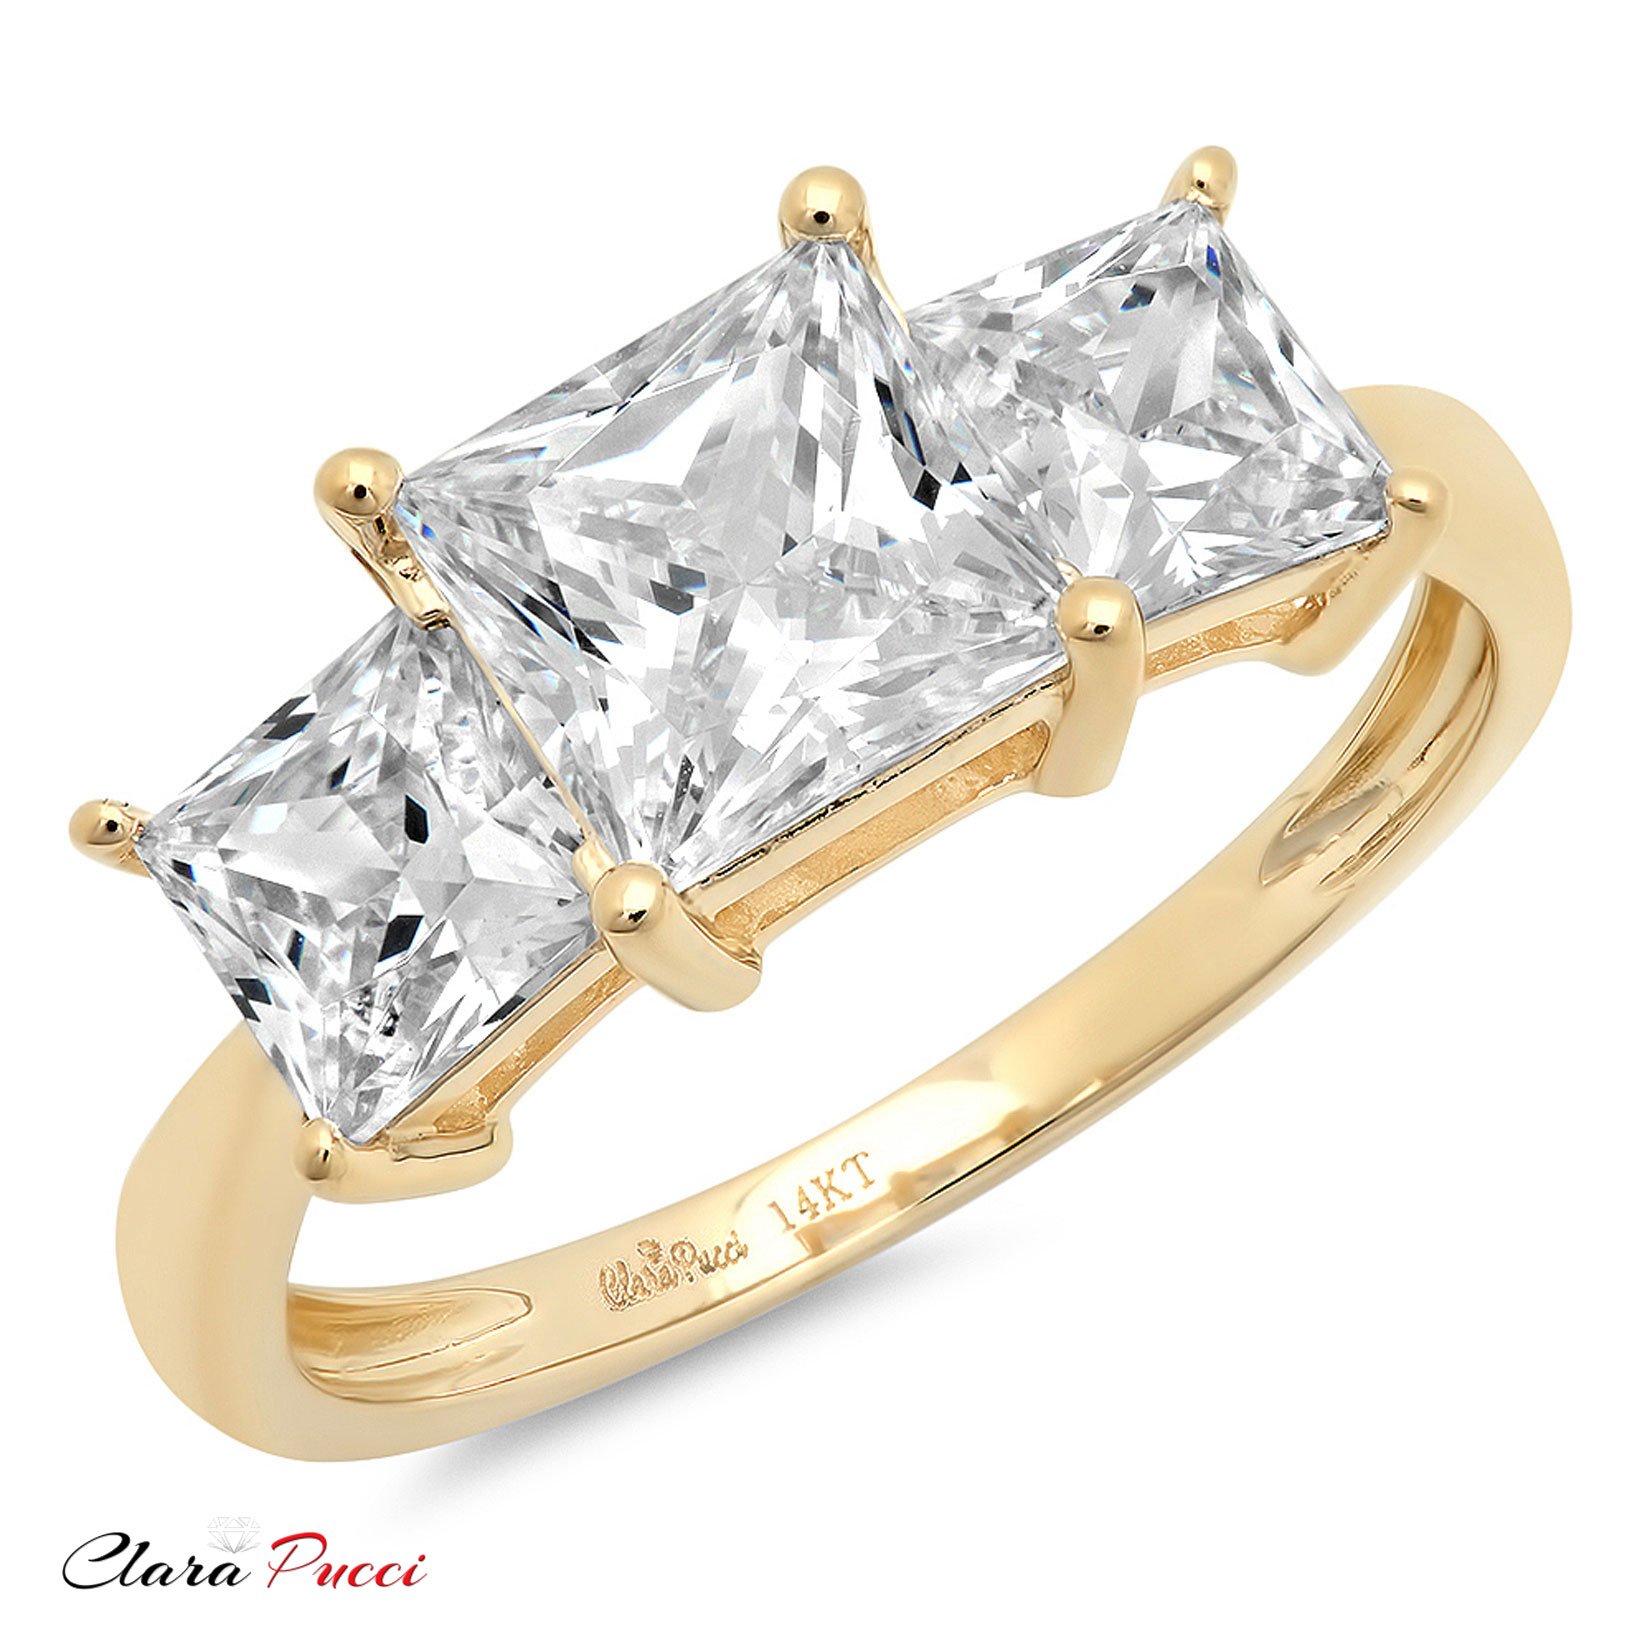 3ct Brilliant Princess Cut 3 Stone Solitaire with Accent Stunning Genuine Moissanite Ideal VVS1 & Simulated Diamond Engagement Promise Statement Anniversary Bridal Wedding Ring Solid 14k Yellow Gold